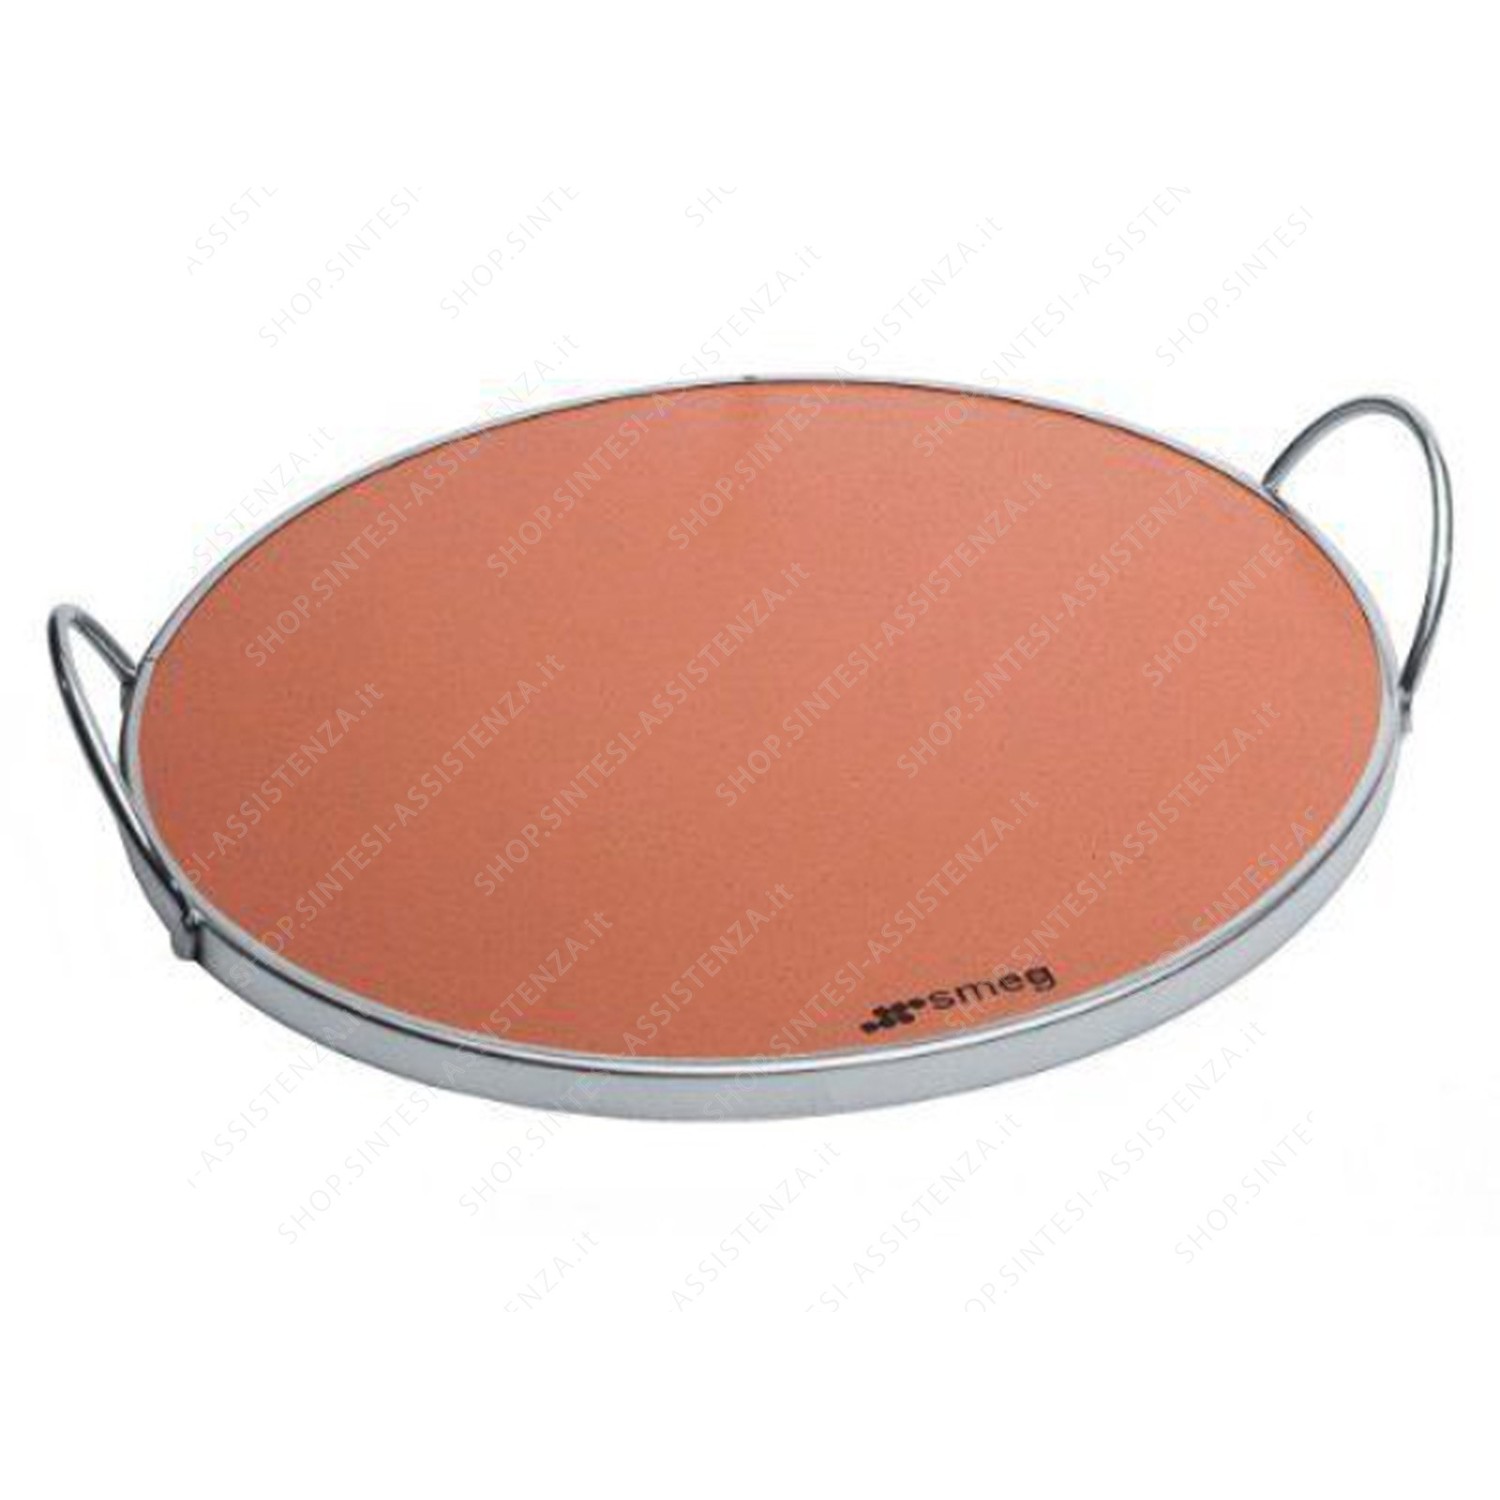 ROUND REFRACTORY STONE PLATE WITH HANDLES SMEG PIZZA OVEN - 695690416